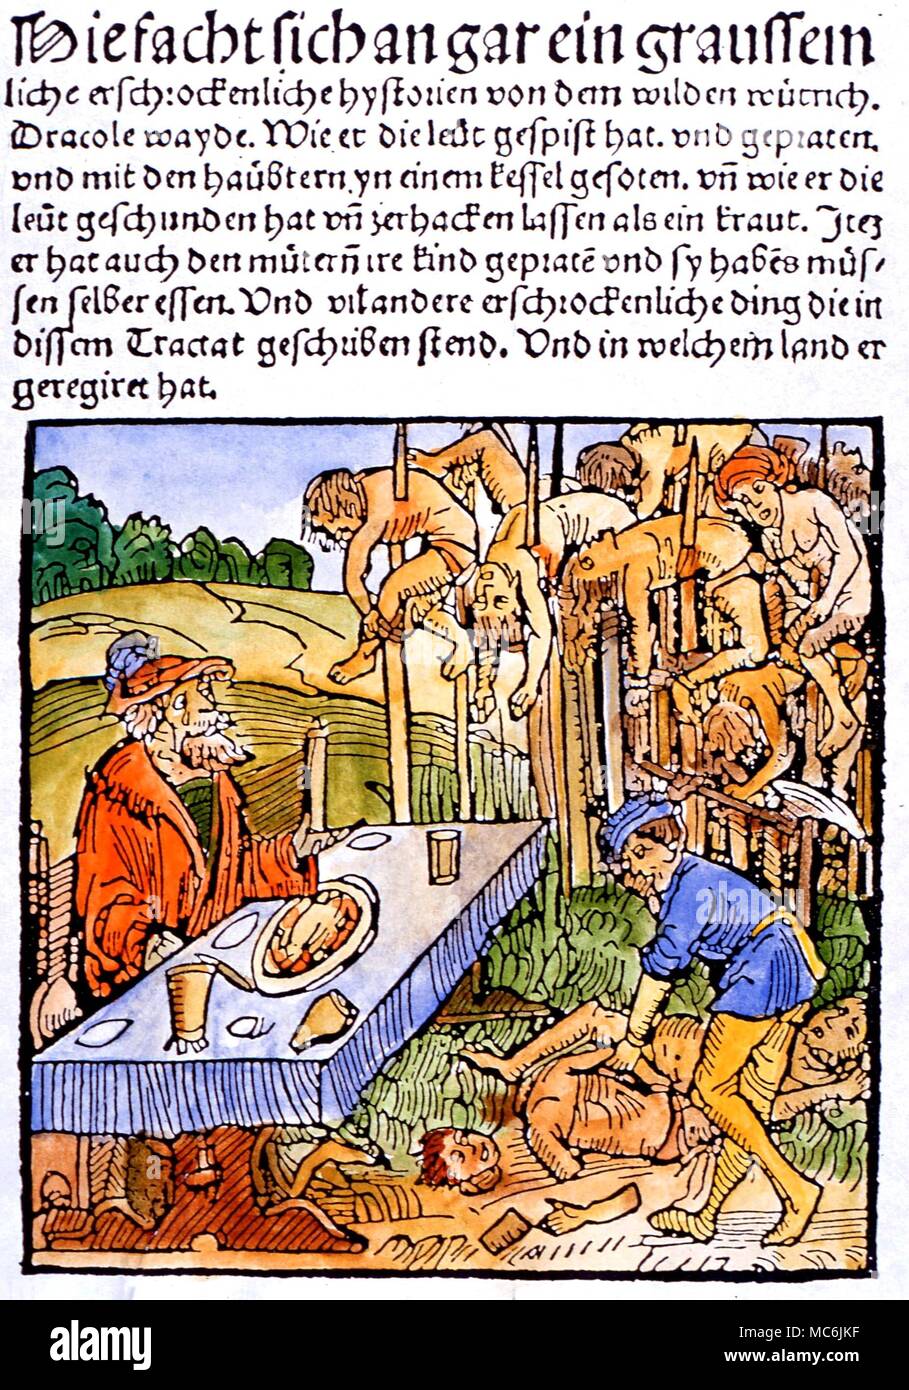 DRACULA - German woodcut of 1499 (published by Ambrosius Huber) showing 'the wild blood-thirsty berserker', Dracula Voevod, eating a meal in front of his impaled and dismembered victims Stock Photo